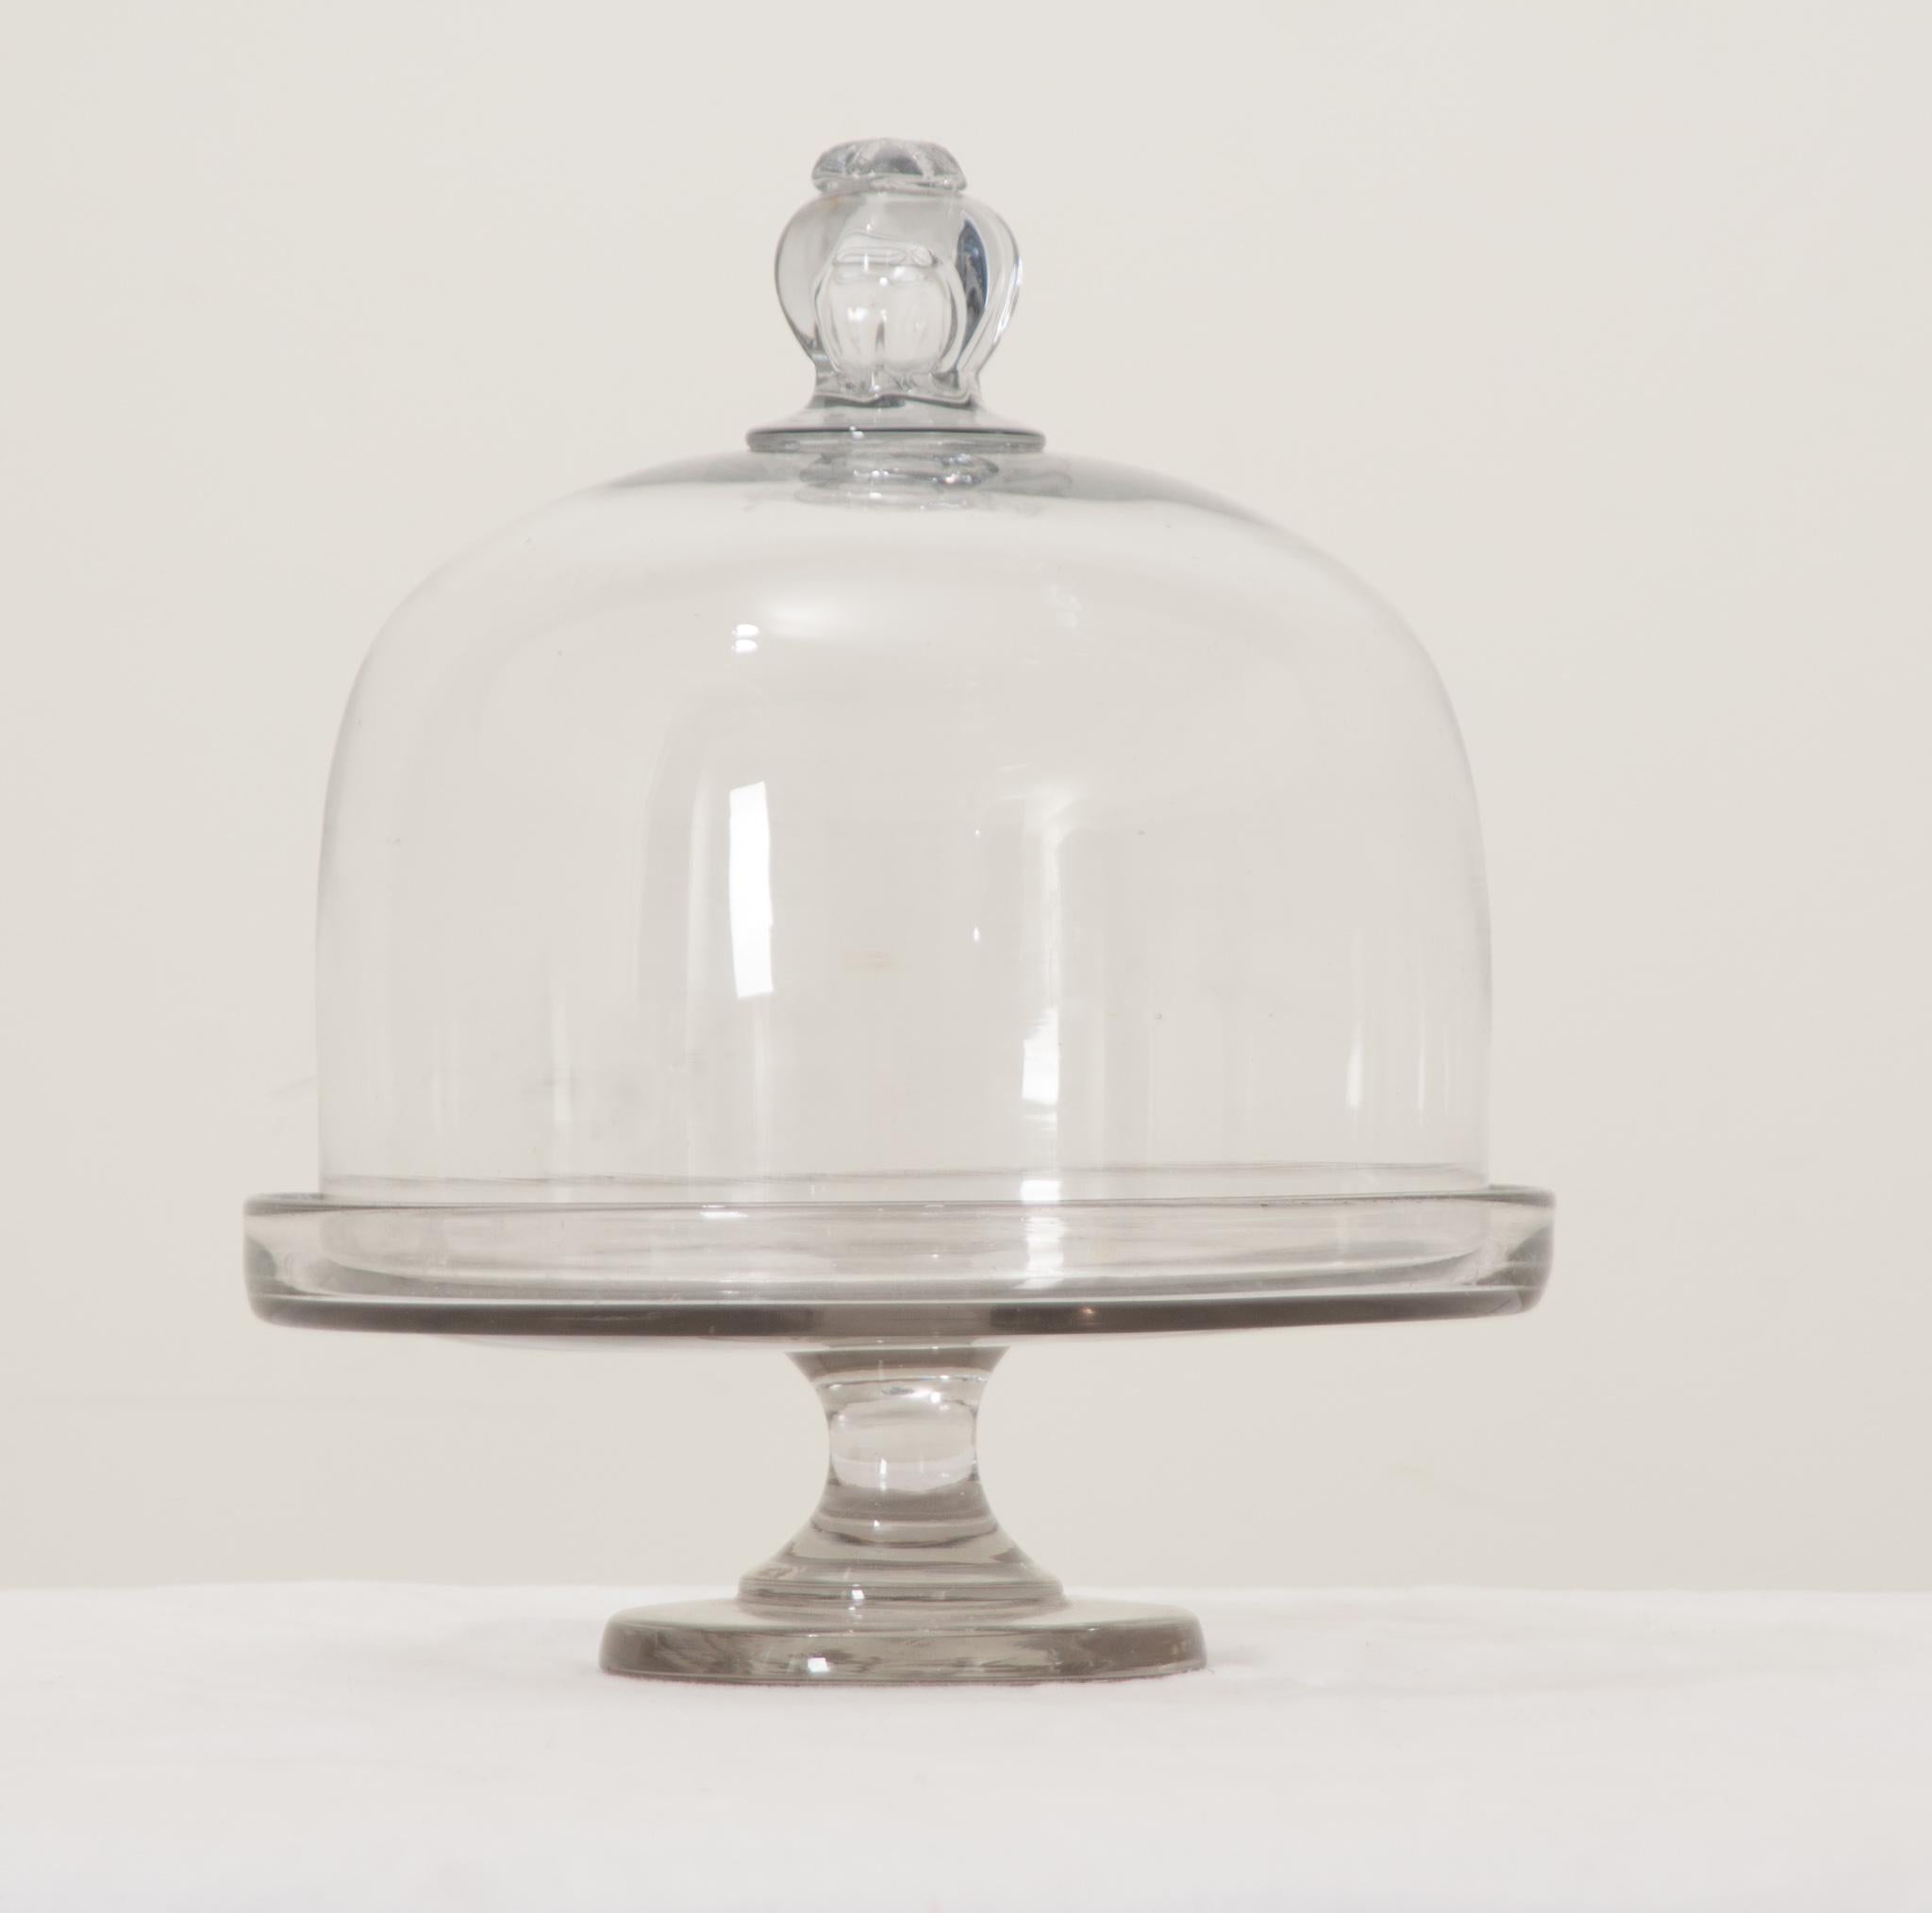 A large and impressive hand blown cake or cheese display, most likely used in a retail shop. A large bell shaped dome with knob sits over the pedestal base. Perfect for keeping your food protected on the counter. Be sure to view the detailed images